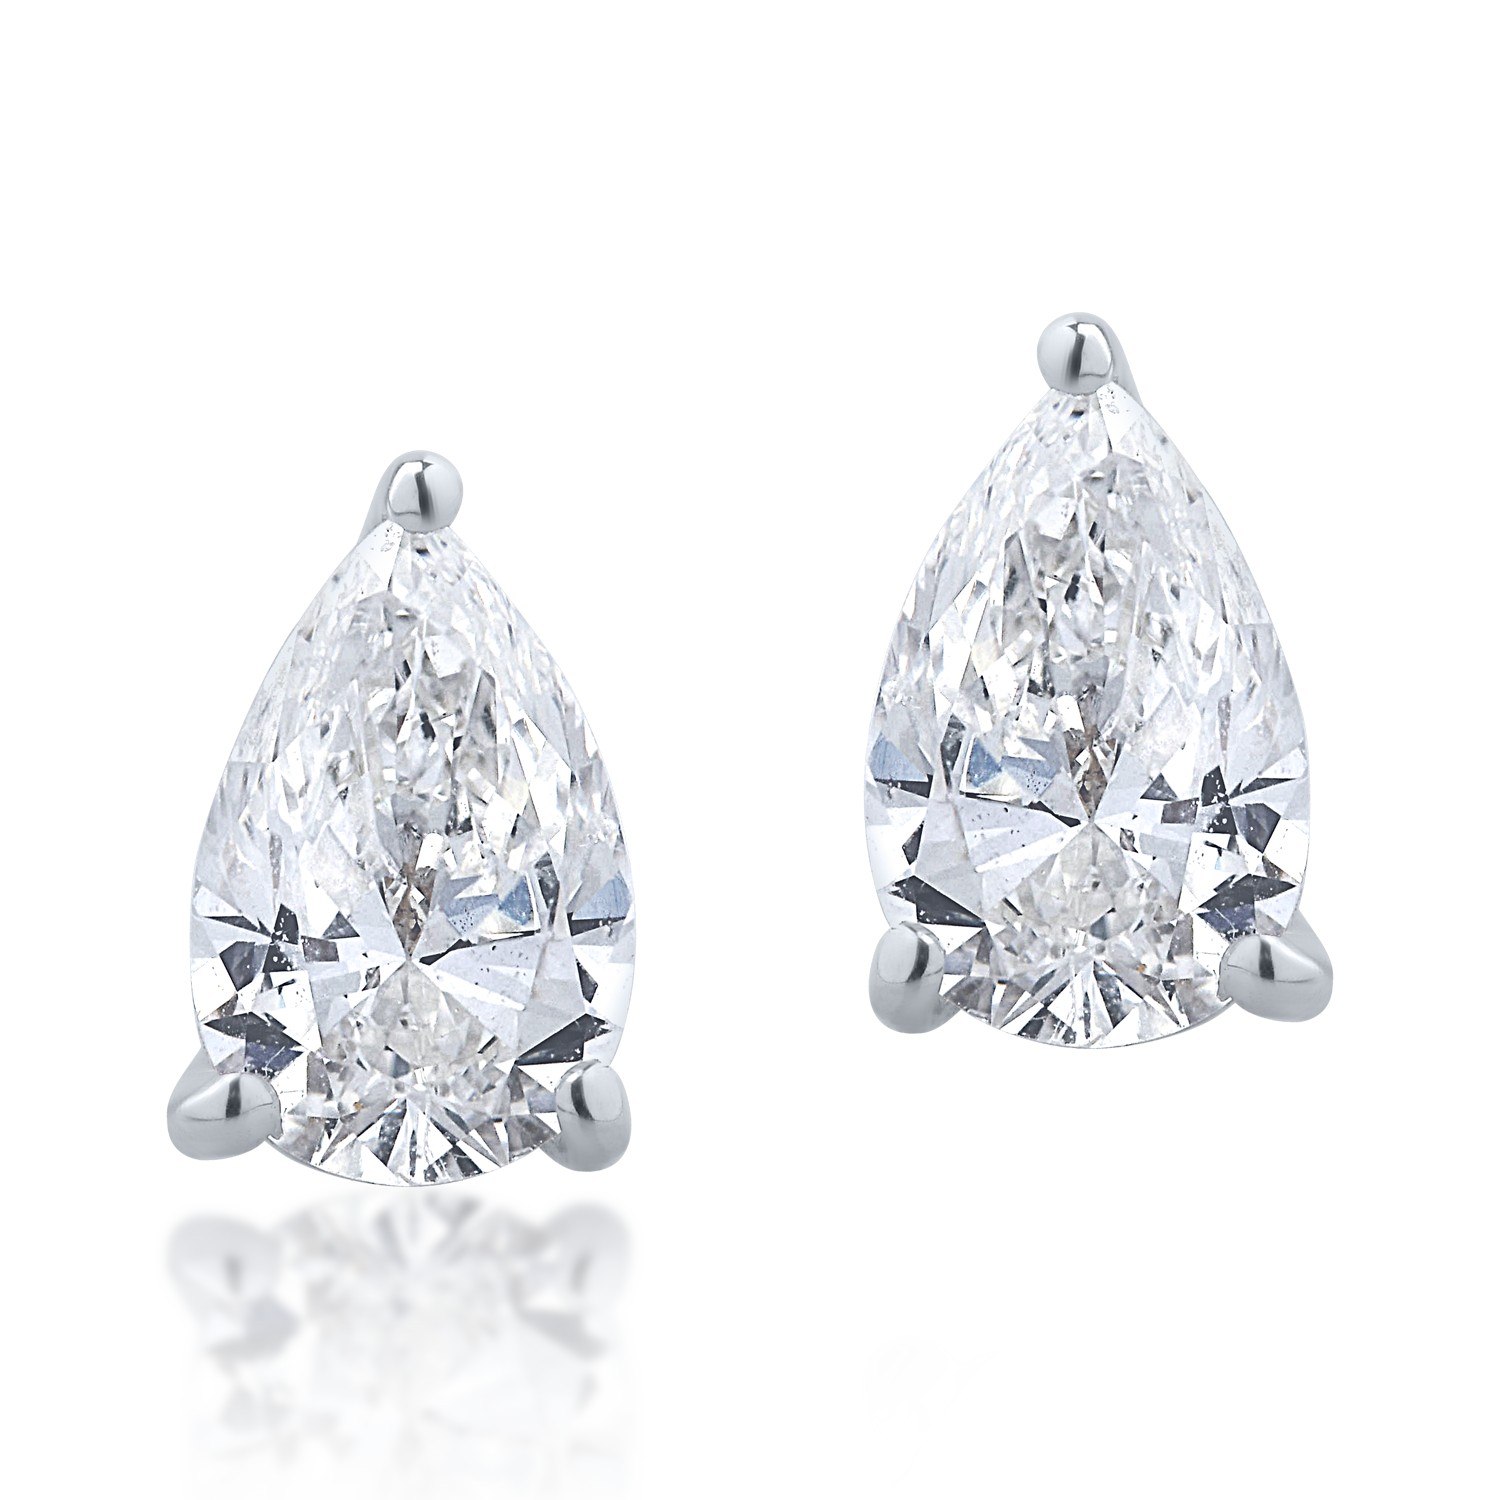 18K white gold earrings with 0.8ct diamonds